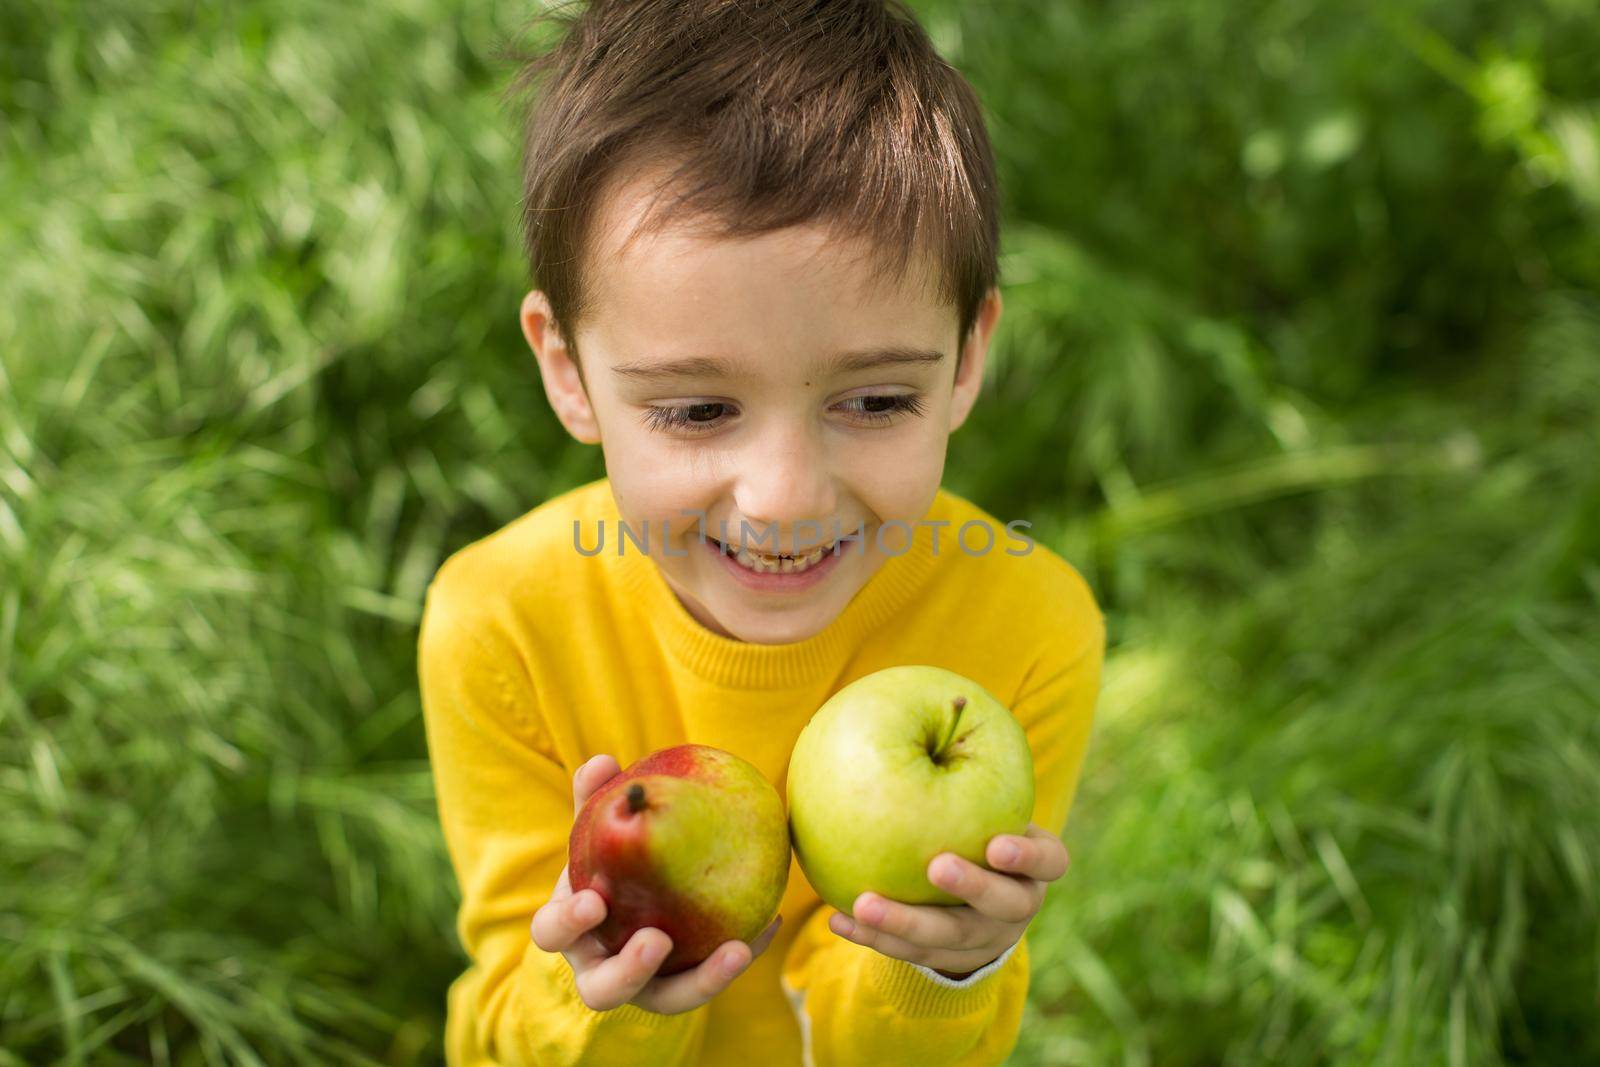 Cute little boy picking apples in a green grass background at sunny day. Healthy nutrition by StudioPeace